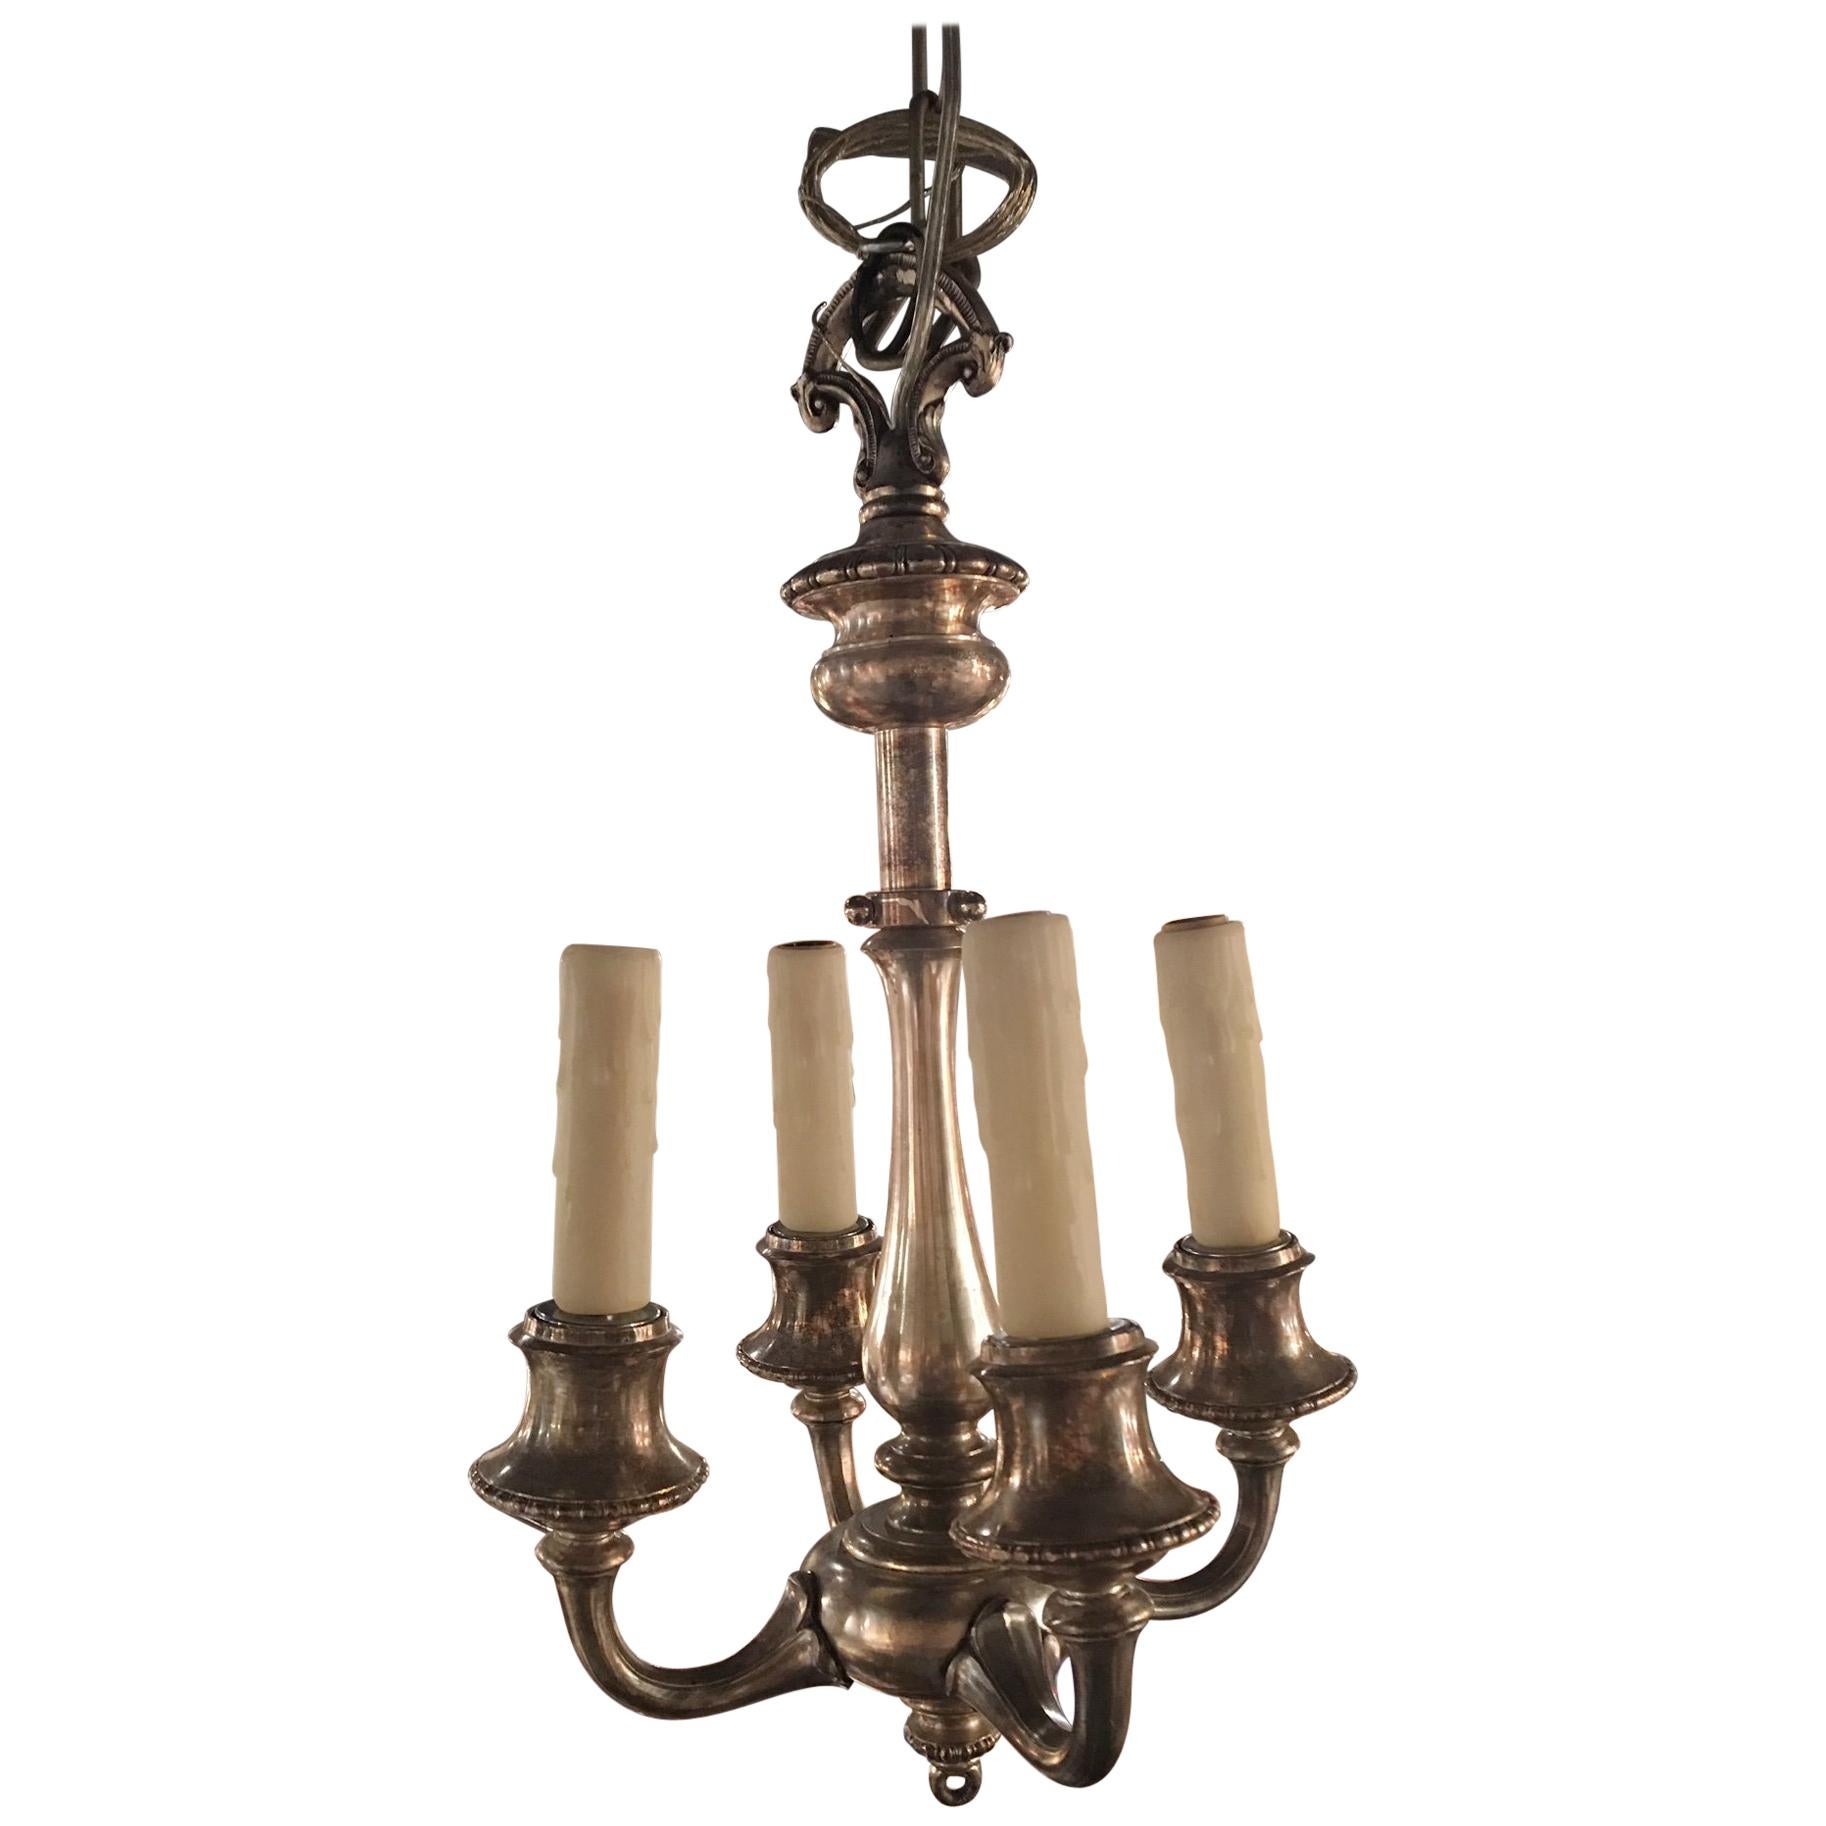 English Four-Light Silver Chandelier or Light Fixture, Early 20th Century